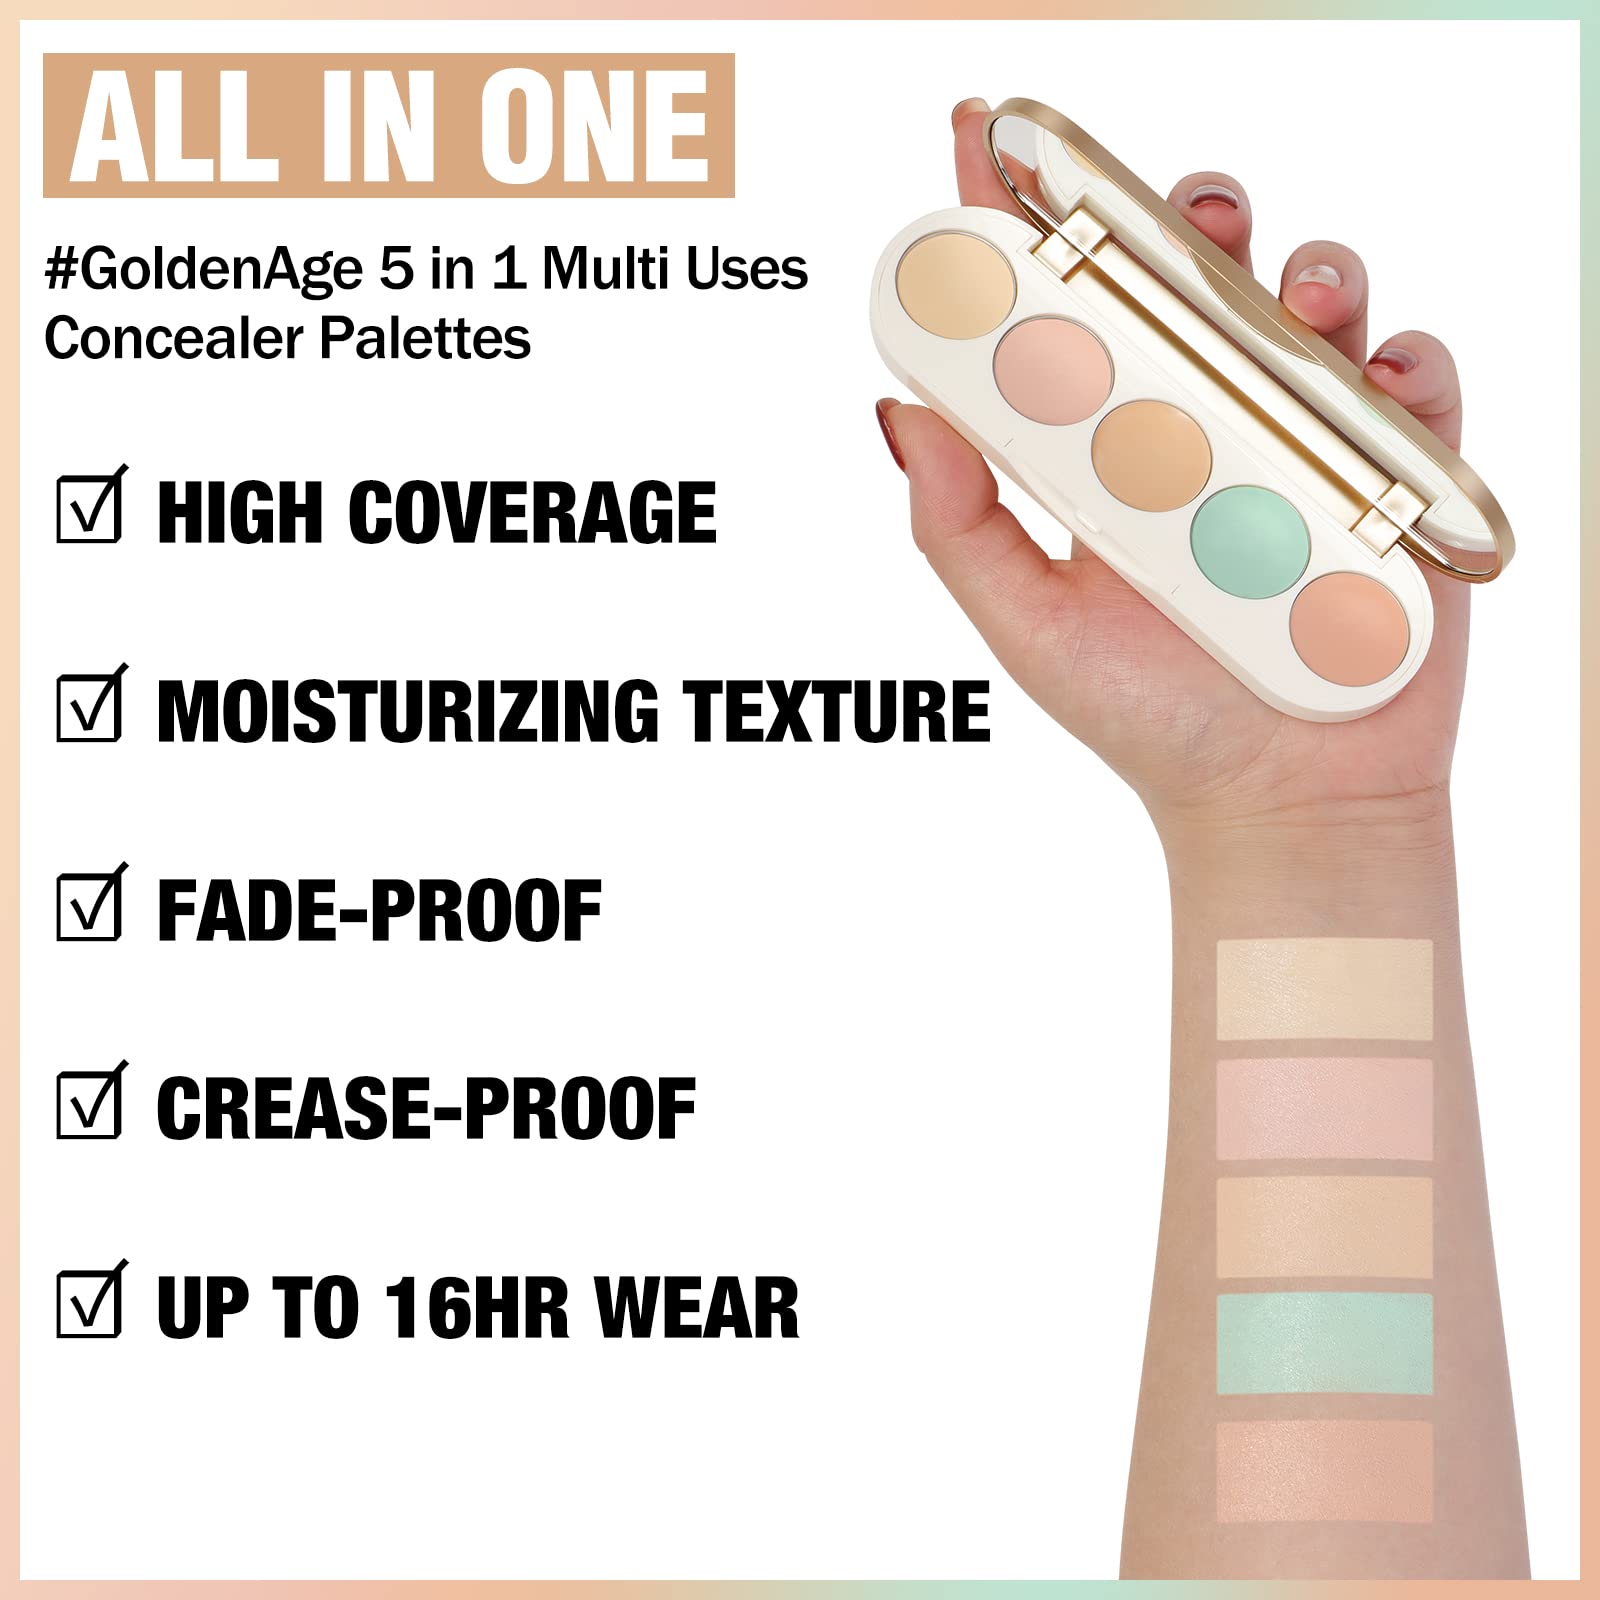 FOCALLURE #GoldenAge 5 in 1 Multi Uses Concealer Palette, 5 Colors Correcting Conceal Palette, Camouflage Contour Palettes for Dark Circles, Face Contouring Highlighter Pallet, CC01 LIGHT-CORRECTING